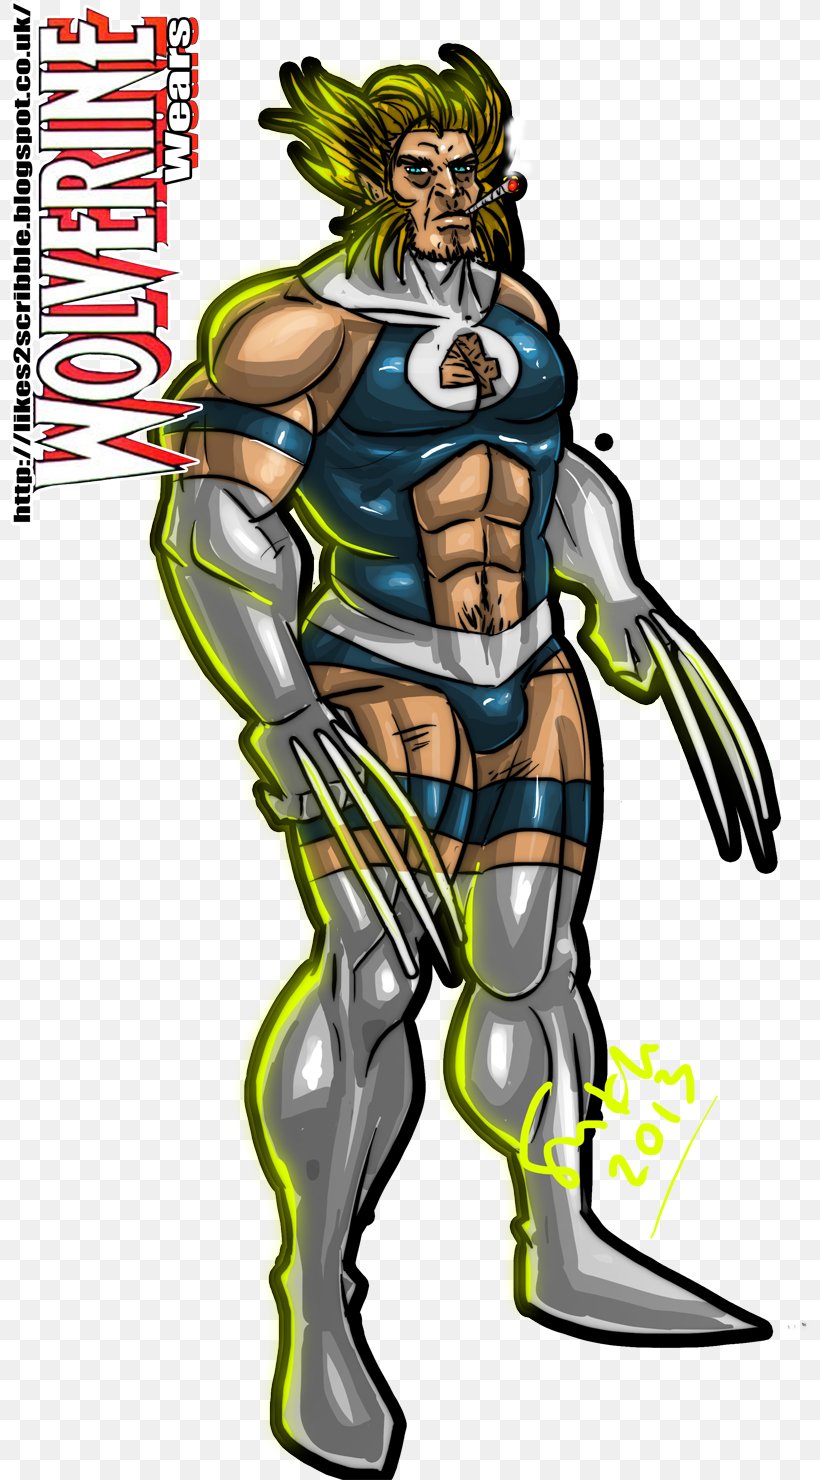 Wolverine Superman Psylocke Invisible Woman Superhero, PNG, 800x1480px, Wolverine, Animation, Cartoon, Character, Comics Download Free